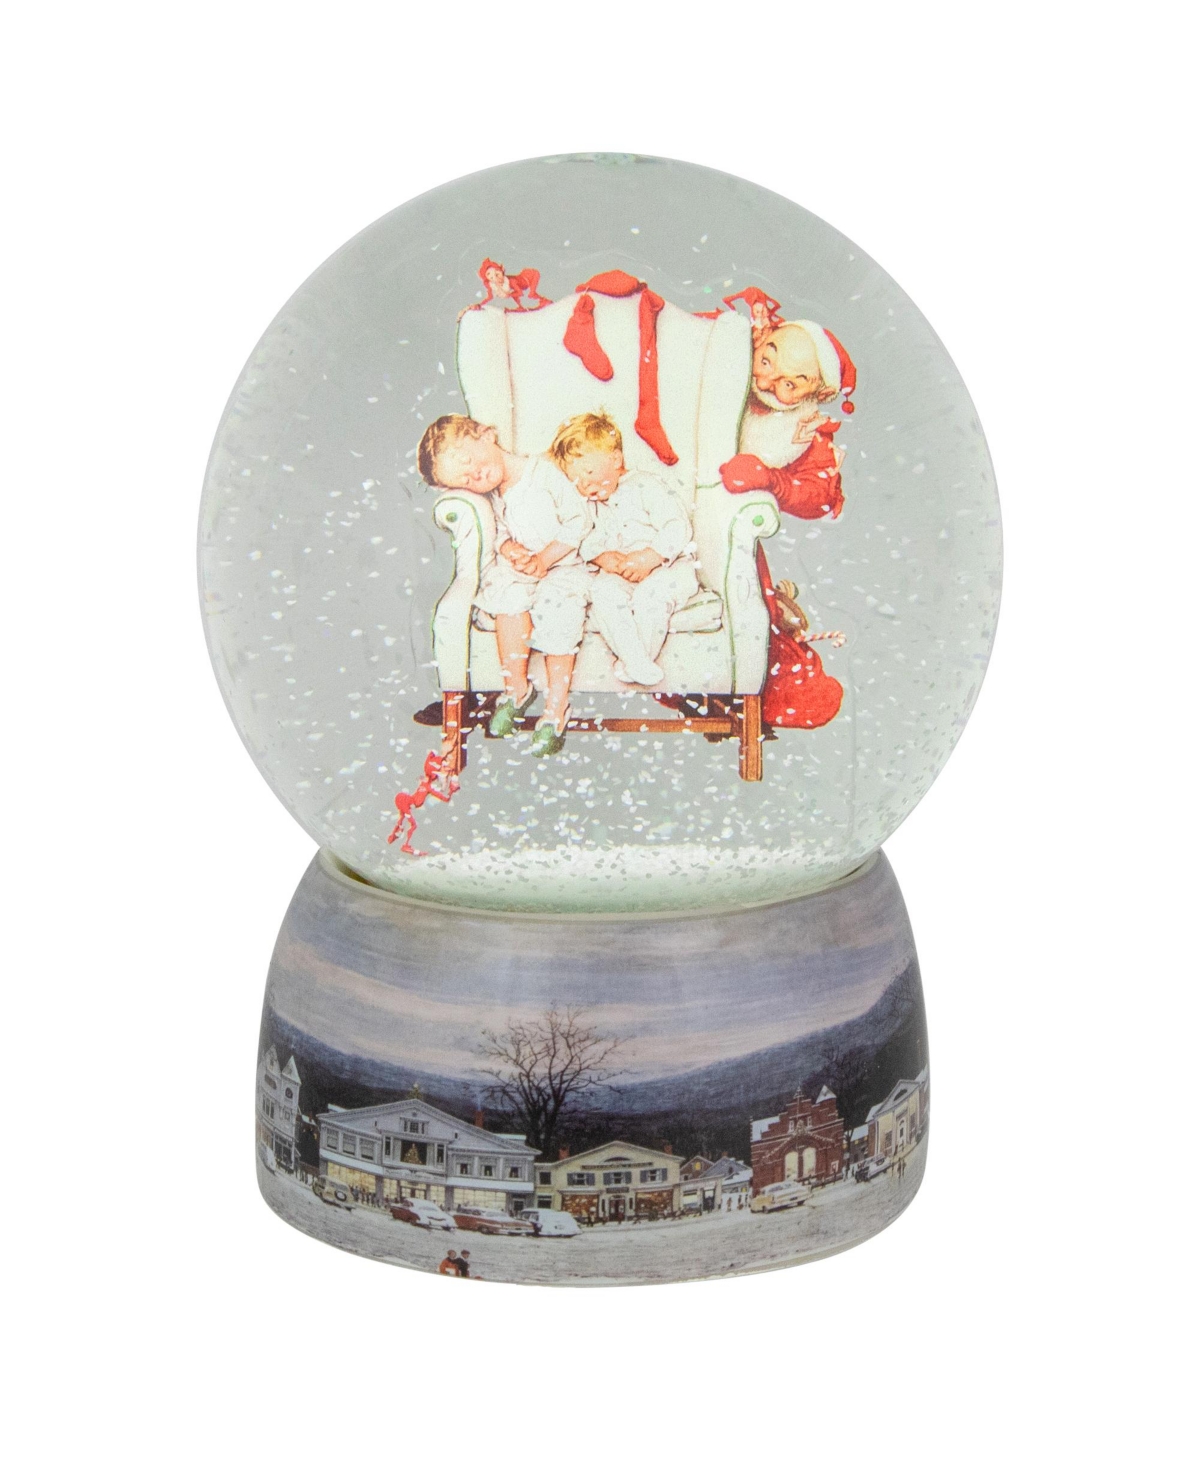 Northlight Norman Rockwell Santa Looking At Two Sleeping Children Christmas Snow Globe, 6.5" In White